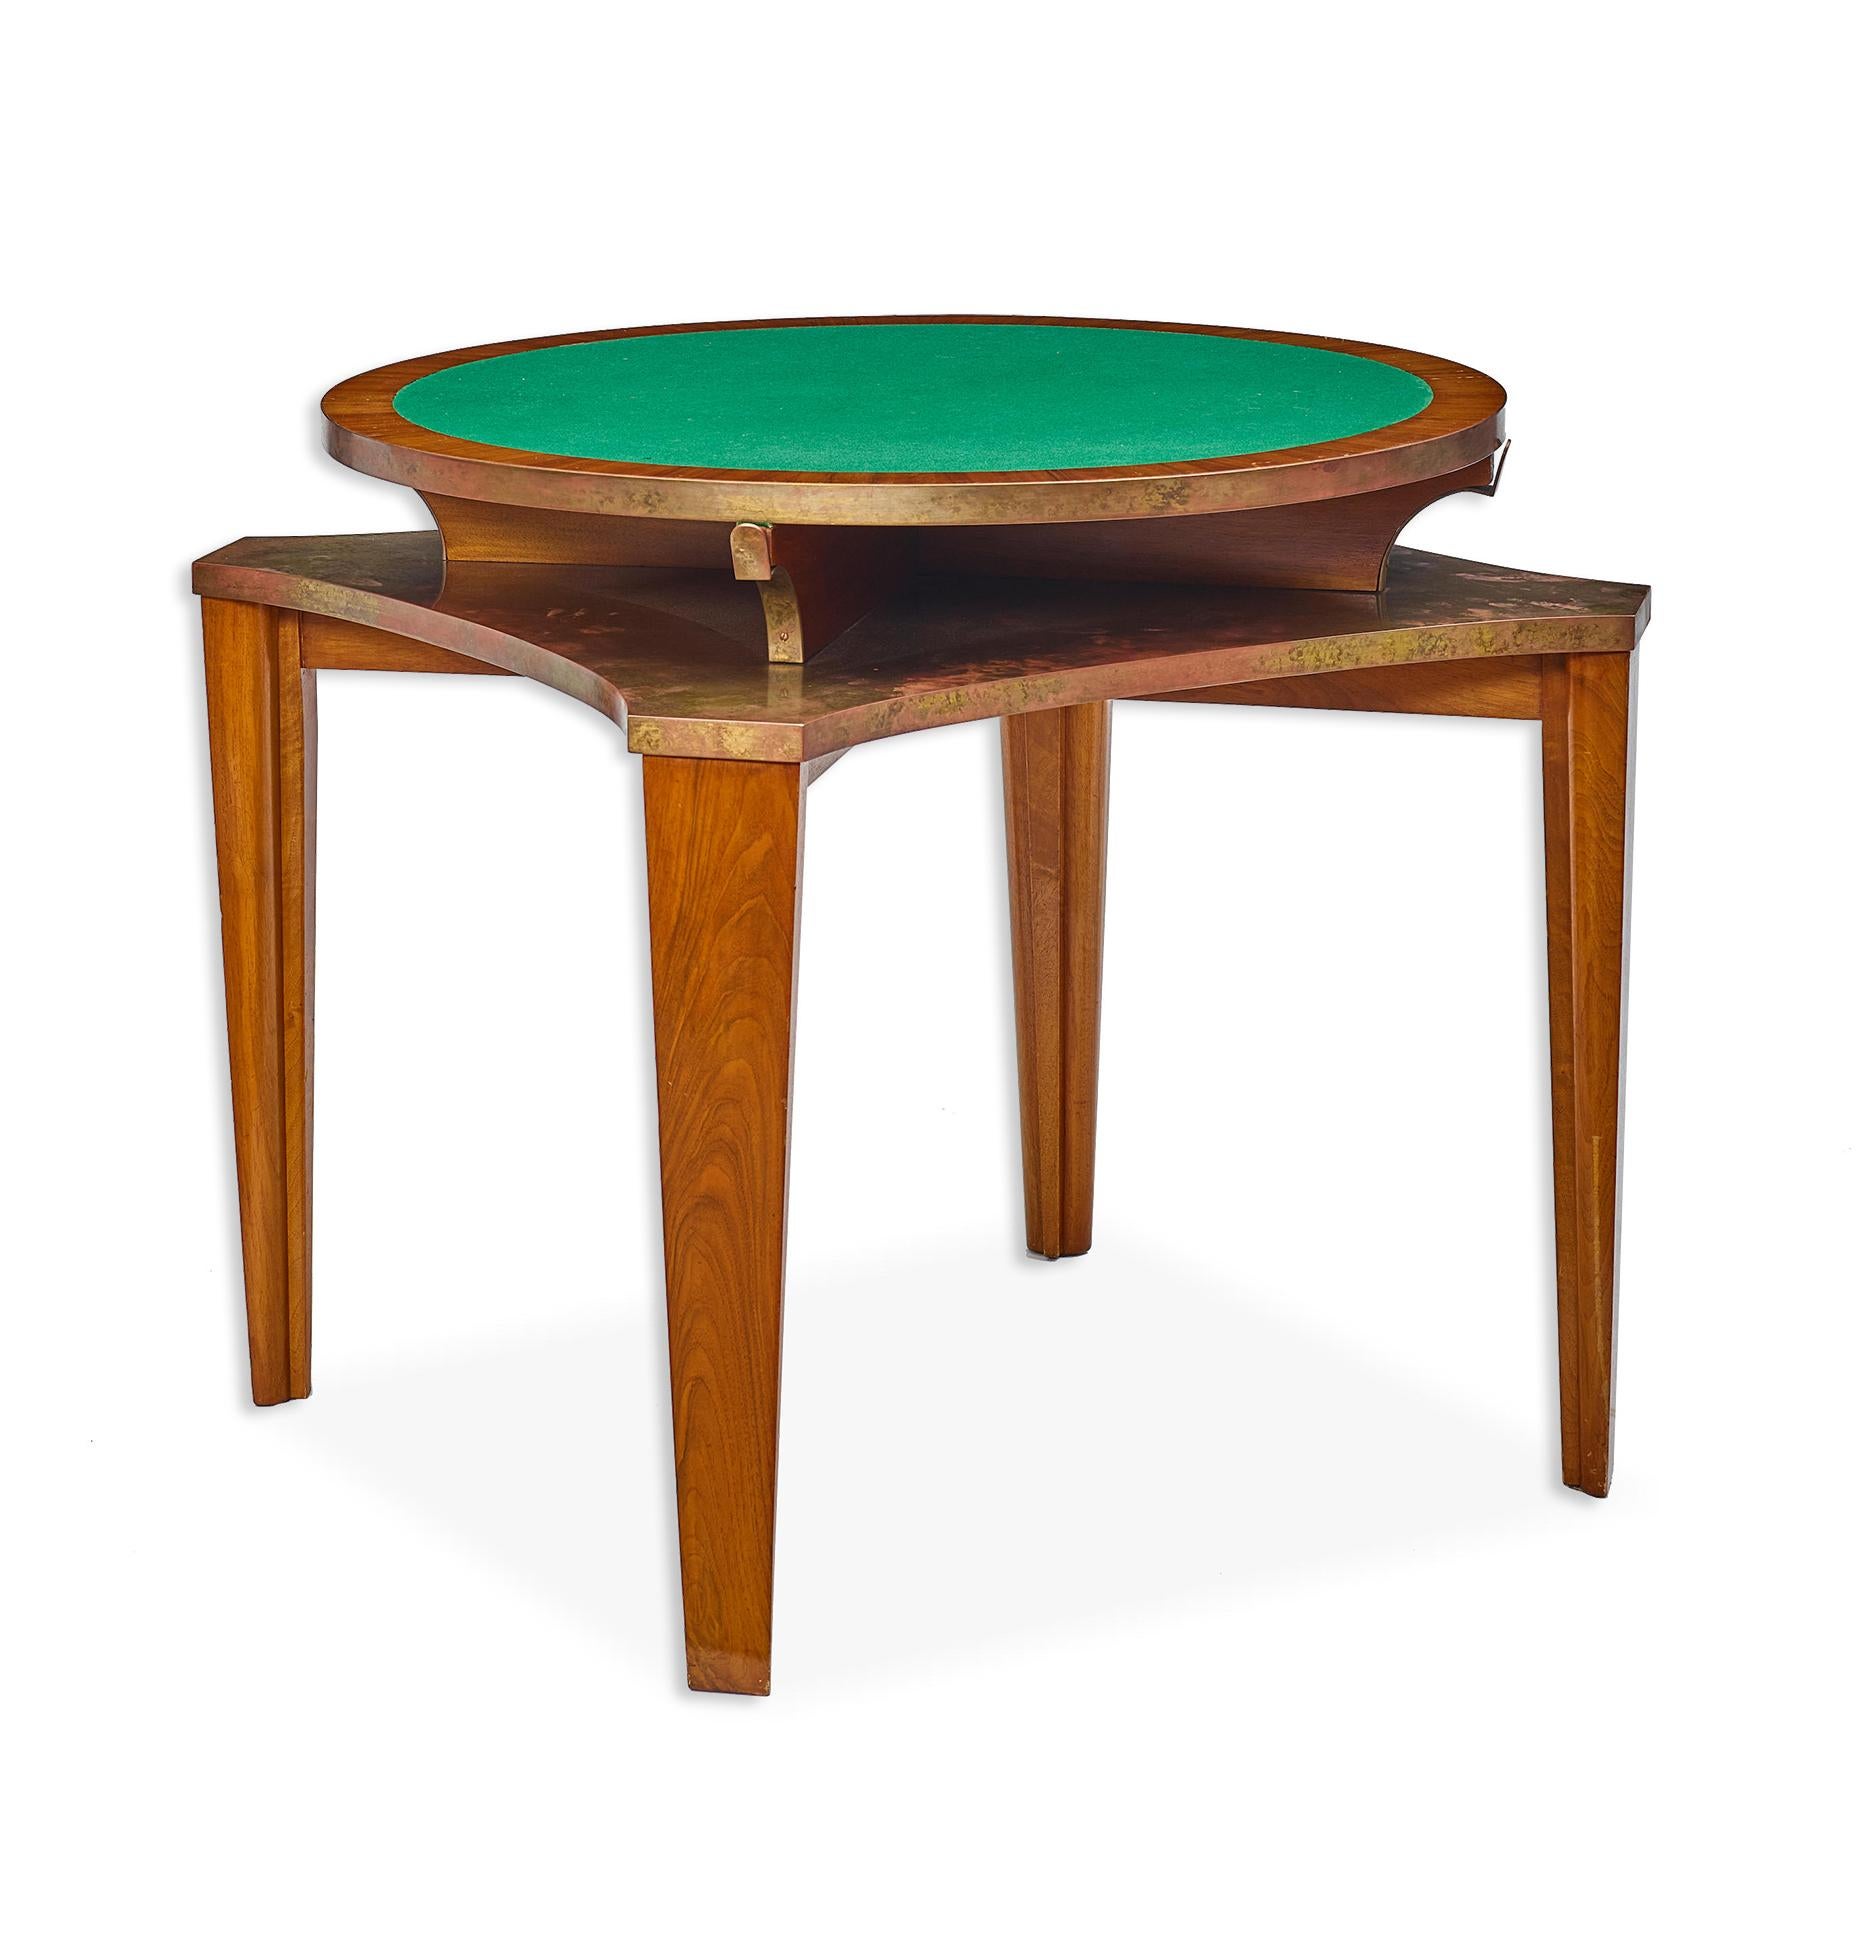 French Eugene PRINTZ - Rare game table with a oxidized brass top. For Sale